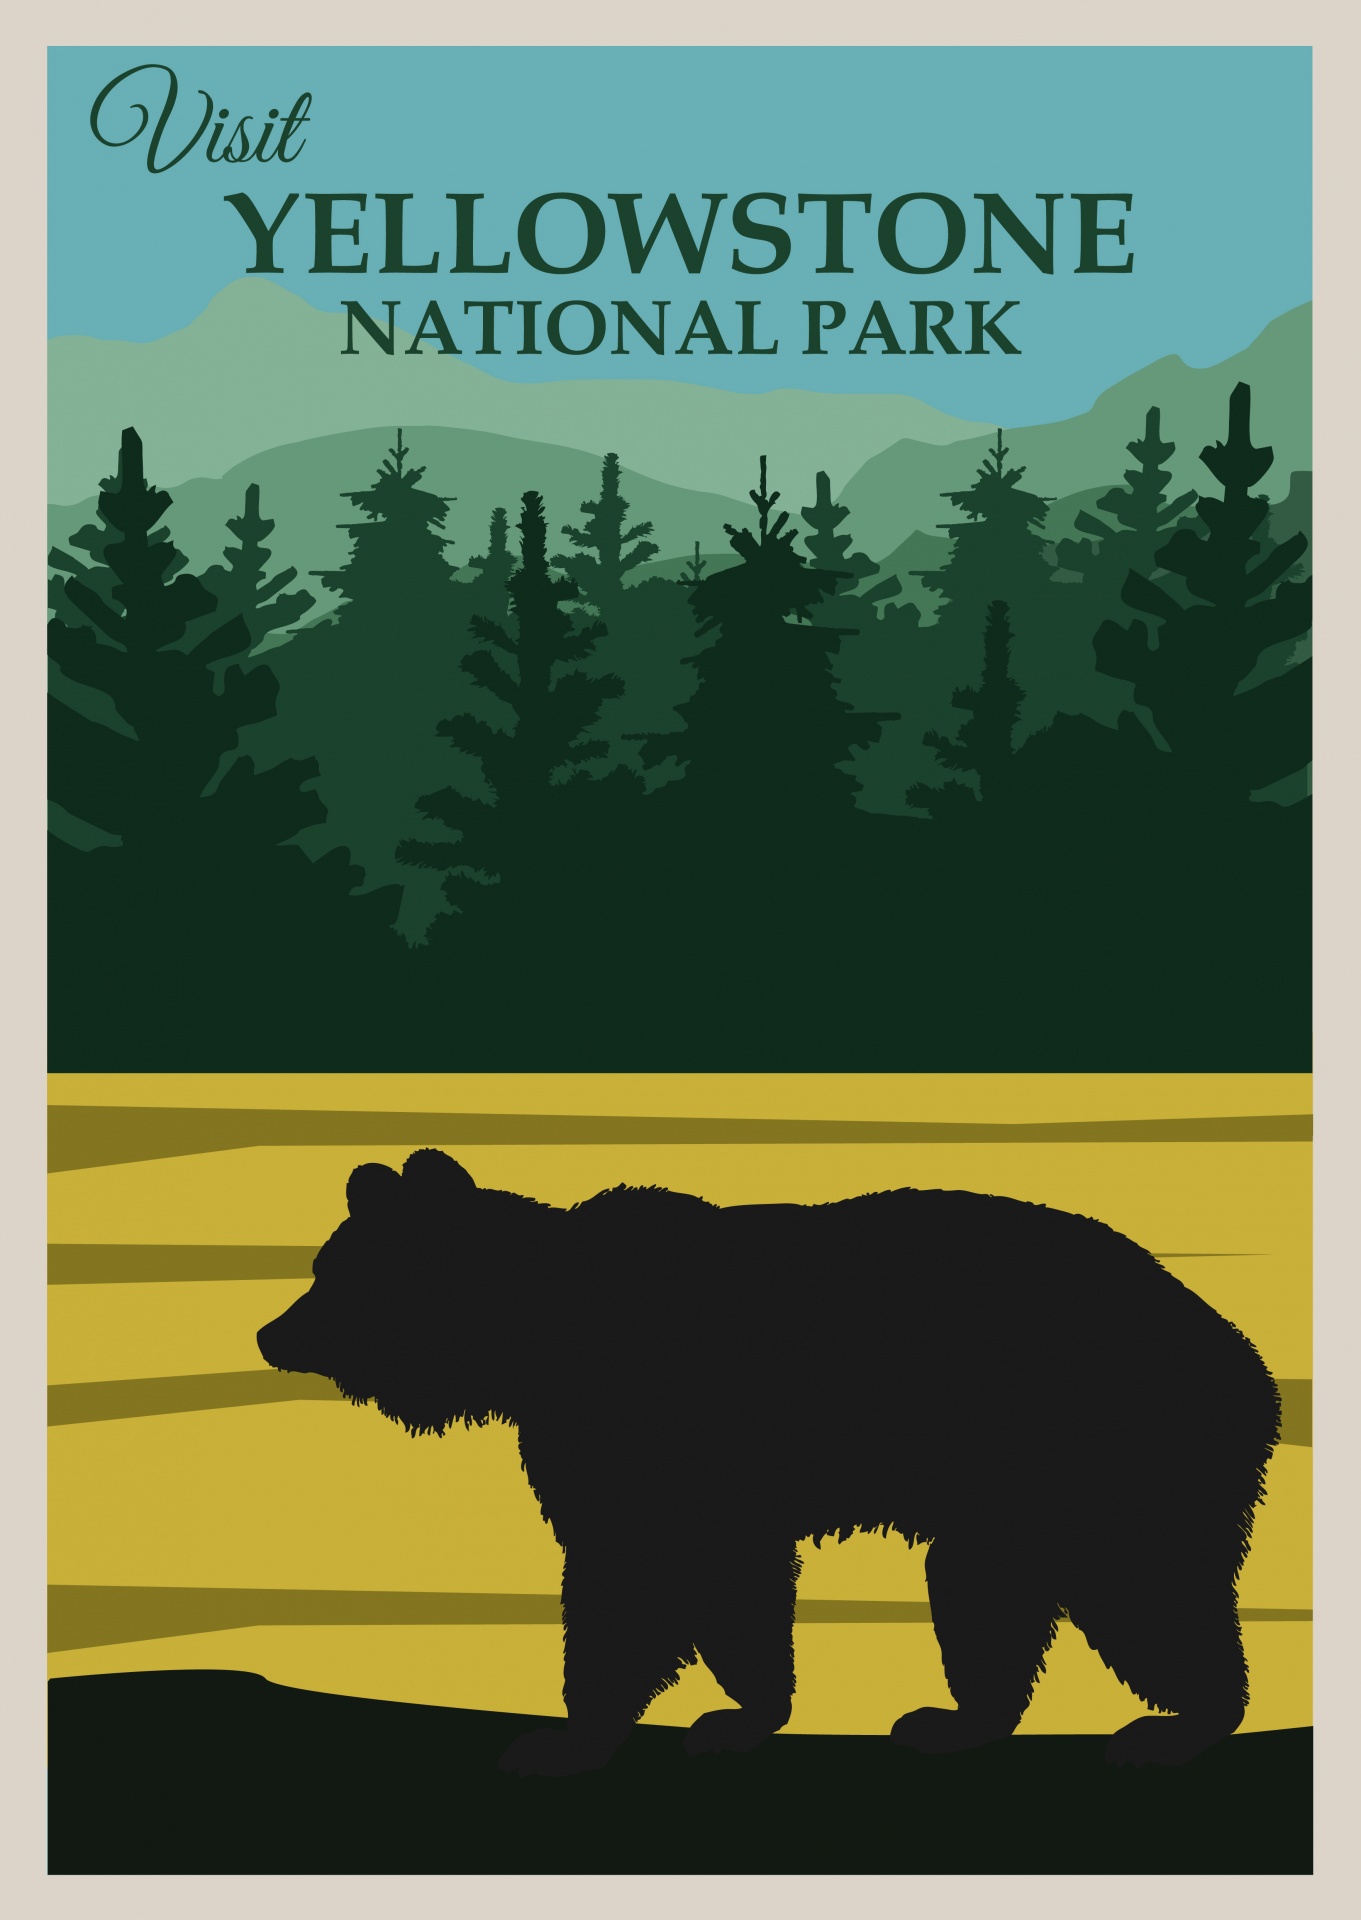 ellowstone National Park, Wyoming, United States of America vintage, retro, style travel poster with bear on open plains with forest and mountains